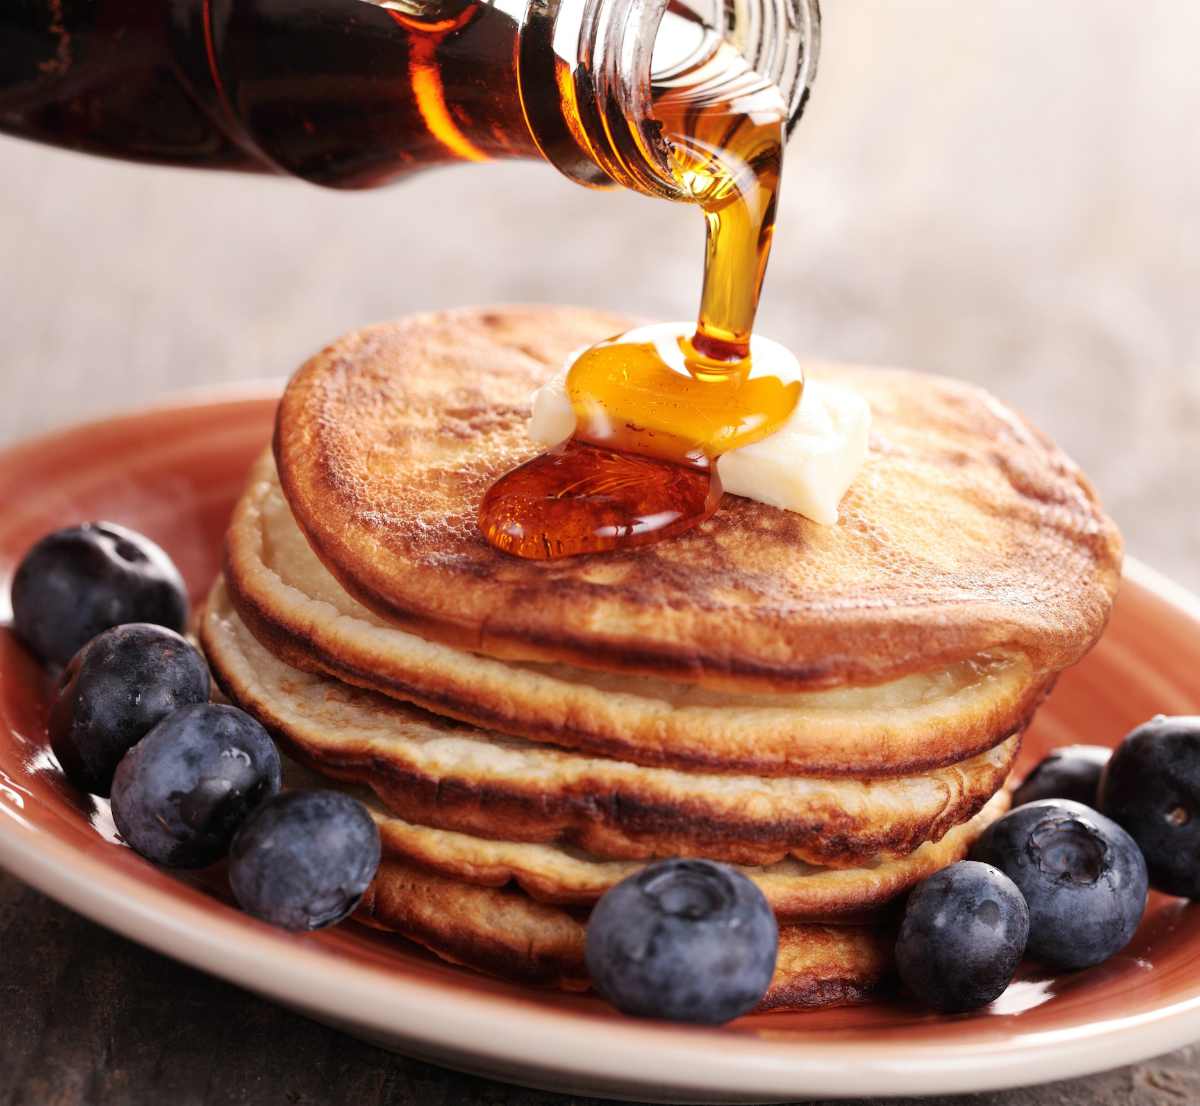 Close-up of pouring maple syrup on stack of pancakes | Survival Food Items That Will Outlast The Apocalypse